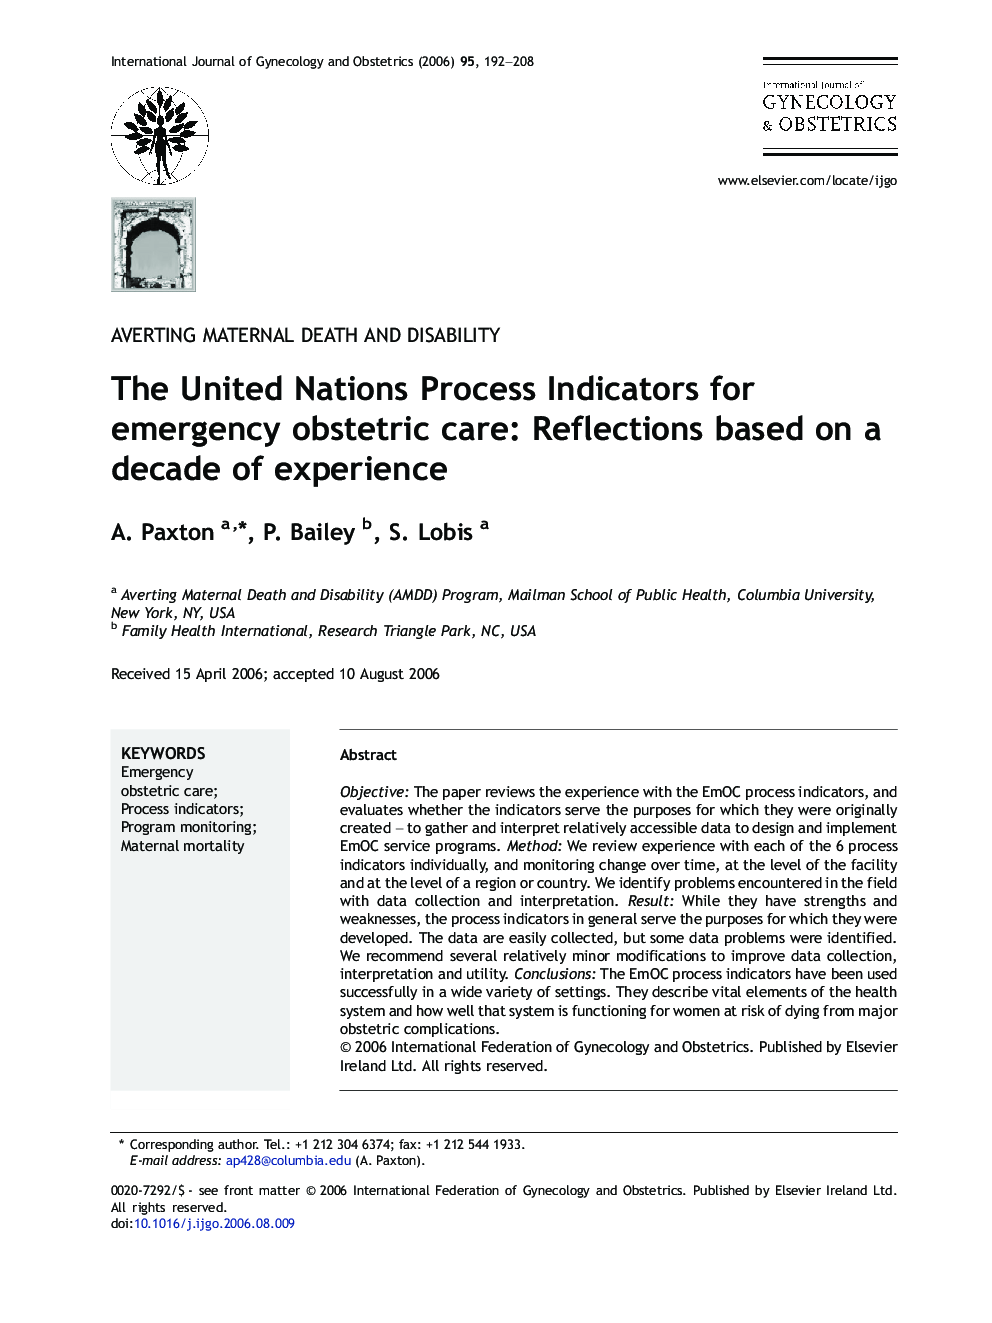 The United Nations Process Indicators for emergency obstetric care: Reflections based on a decade of experience